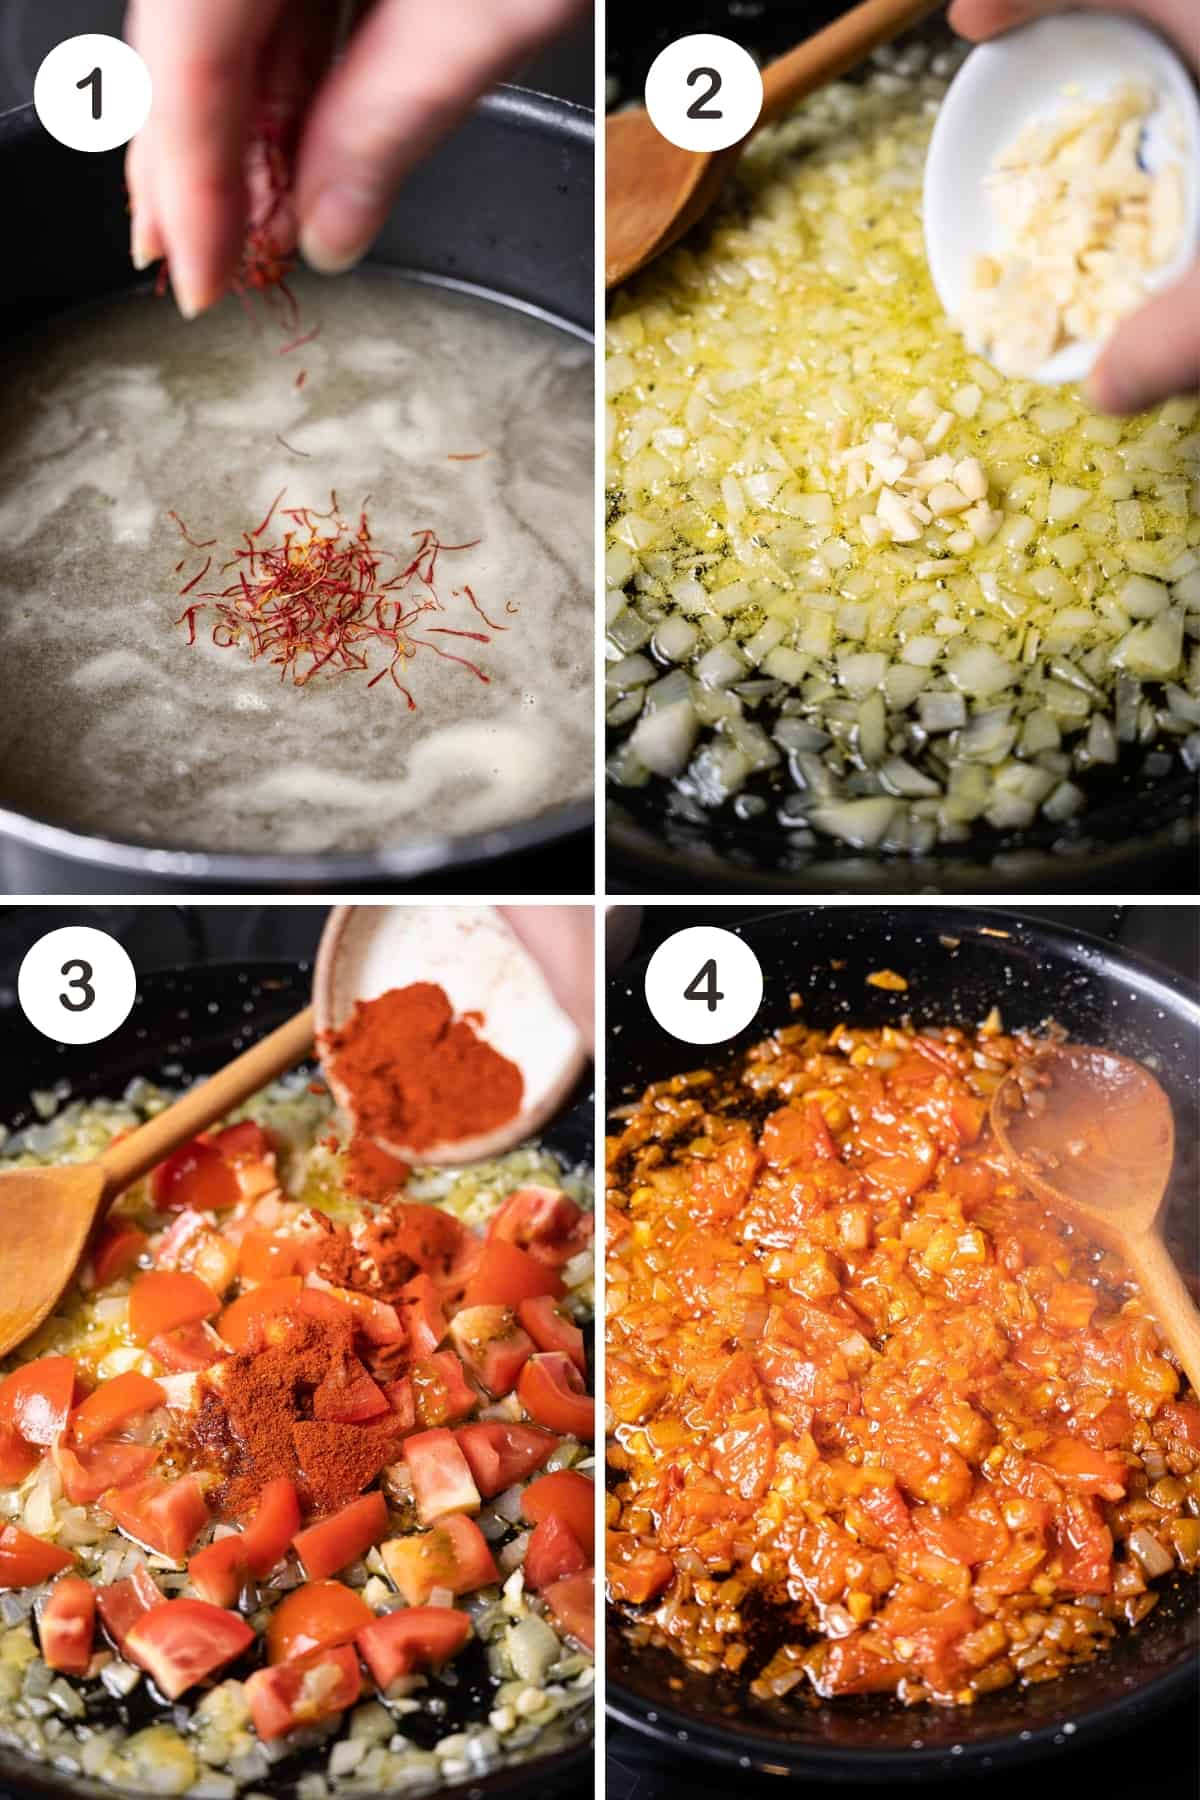 Seafood paella steps 1-4 in a grid.